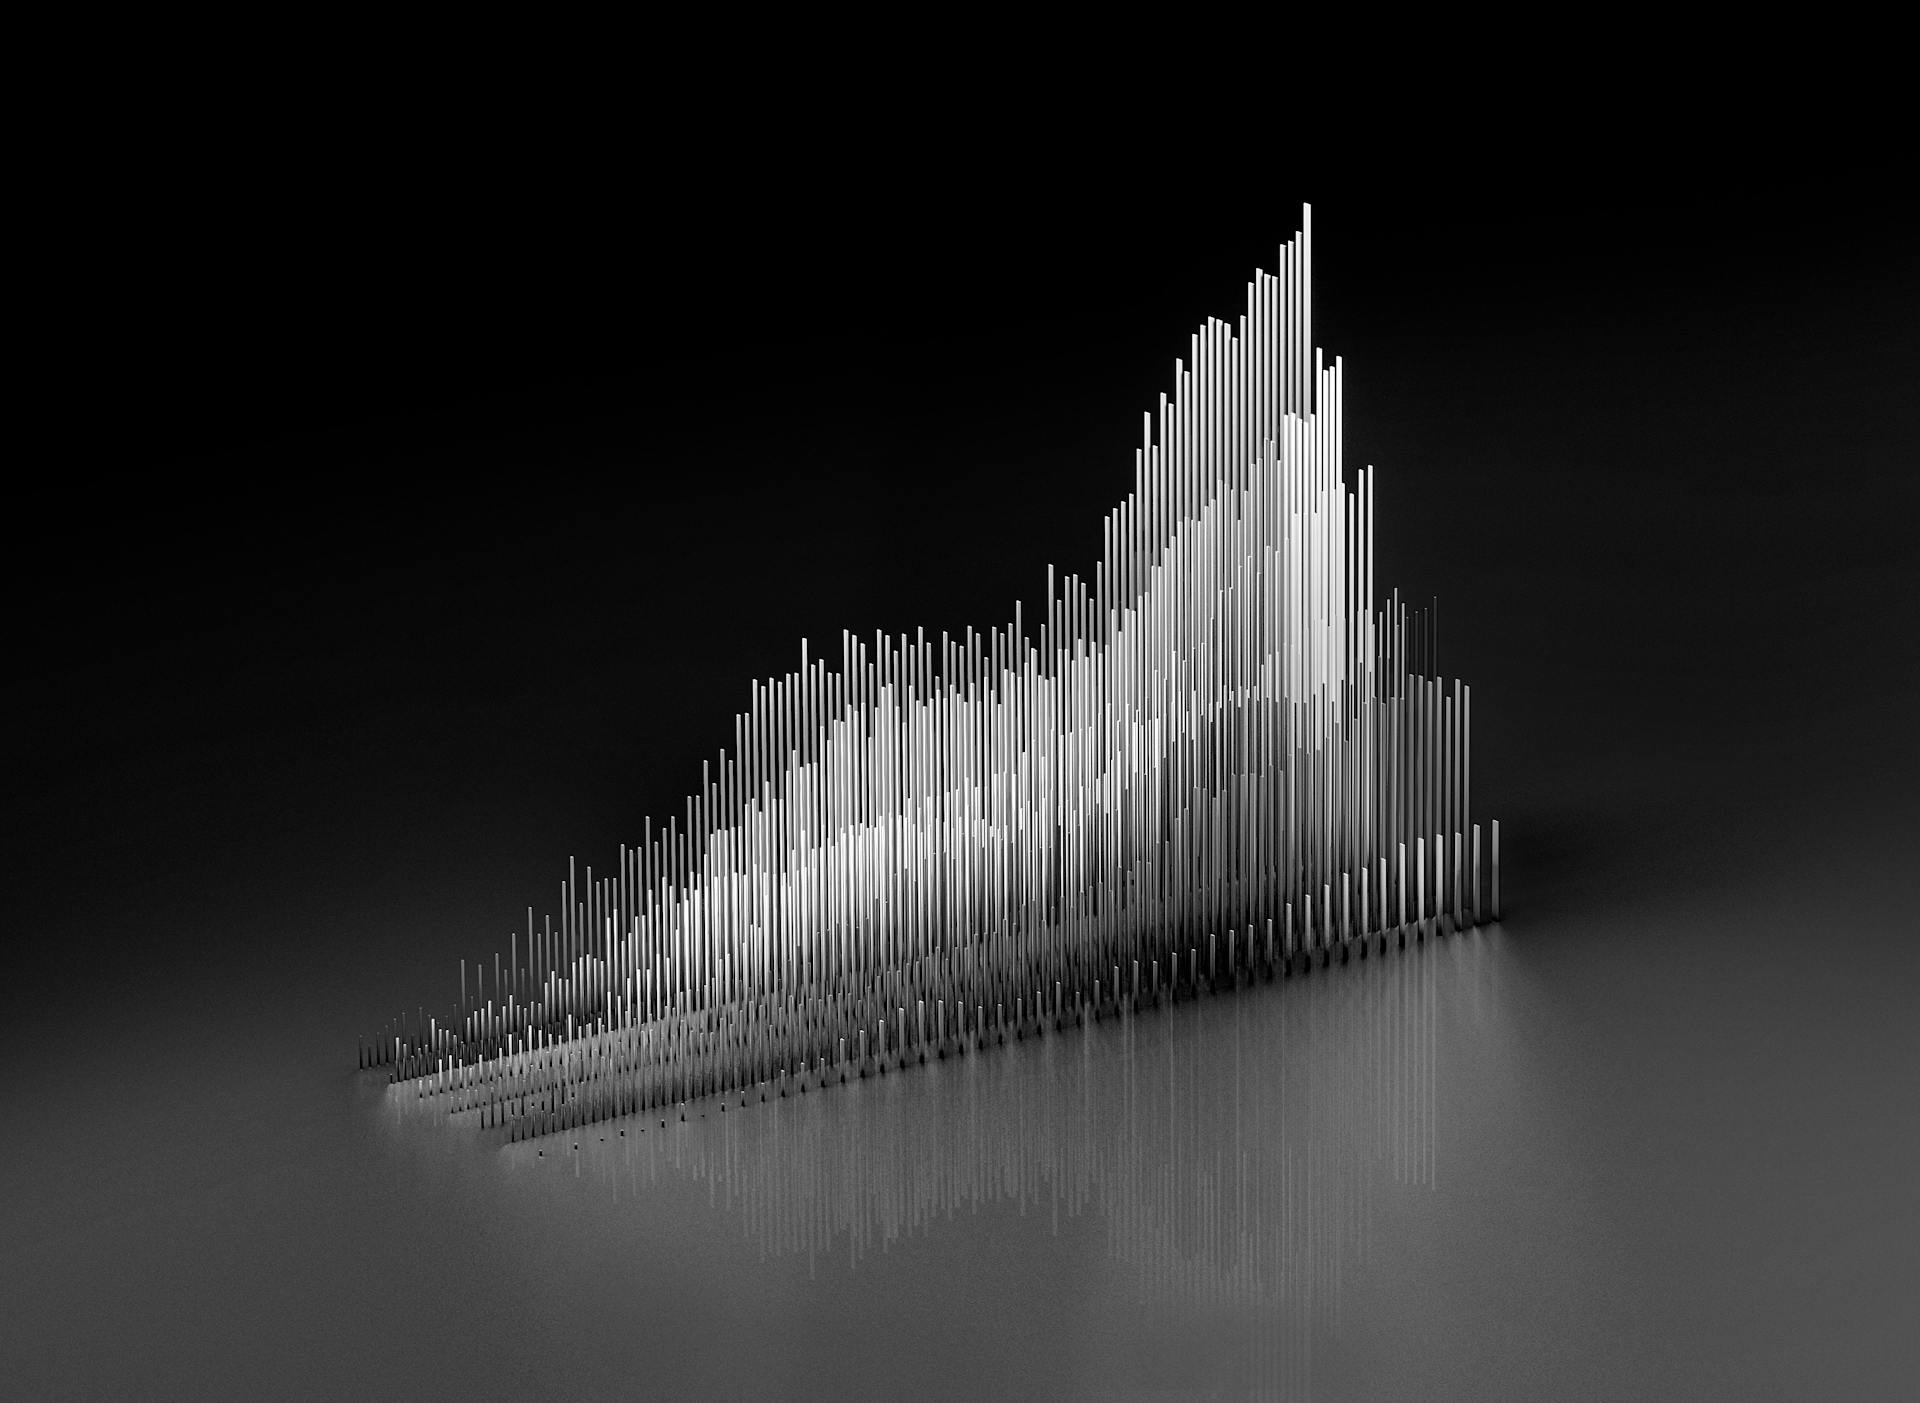 Black and white 3D representation of a graph with multiple different items and levels